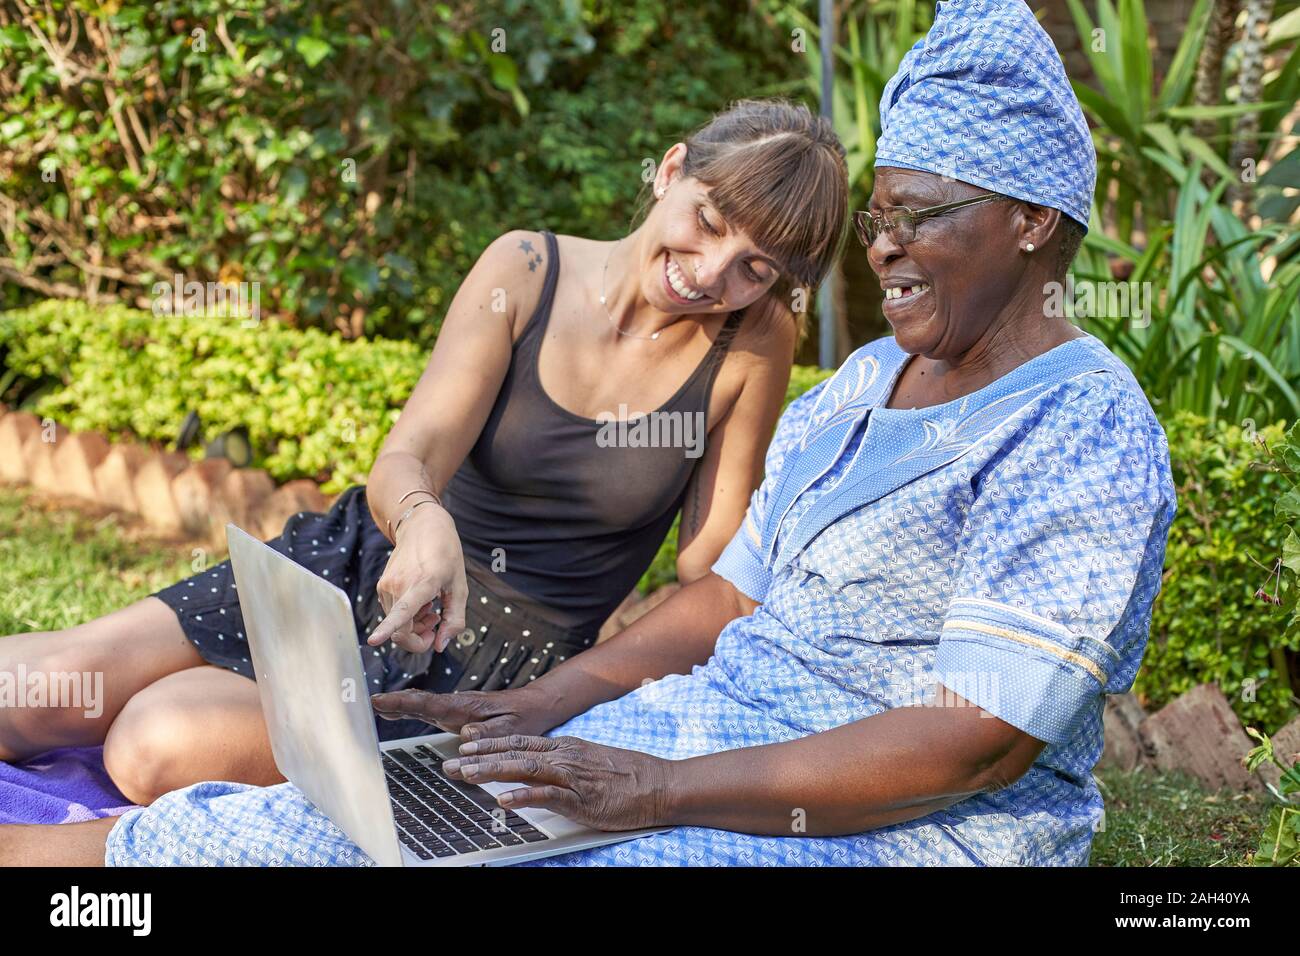 Happy senior woman sitting on lawn sharing laptop with a woman Stock Photo